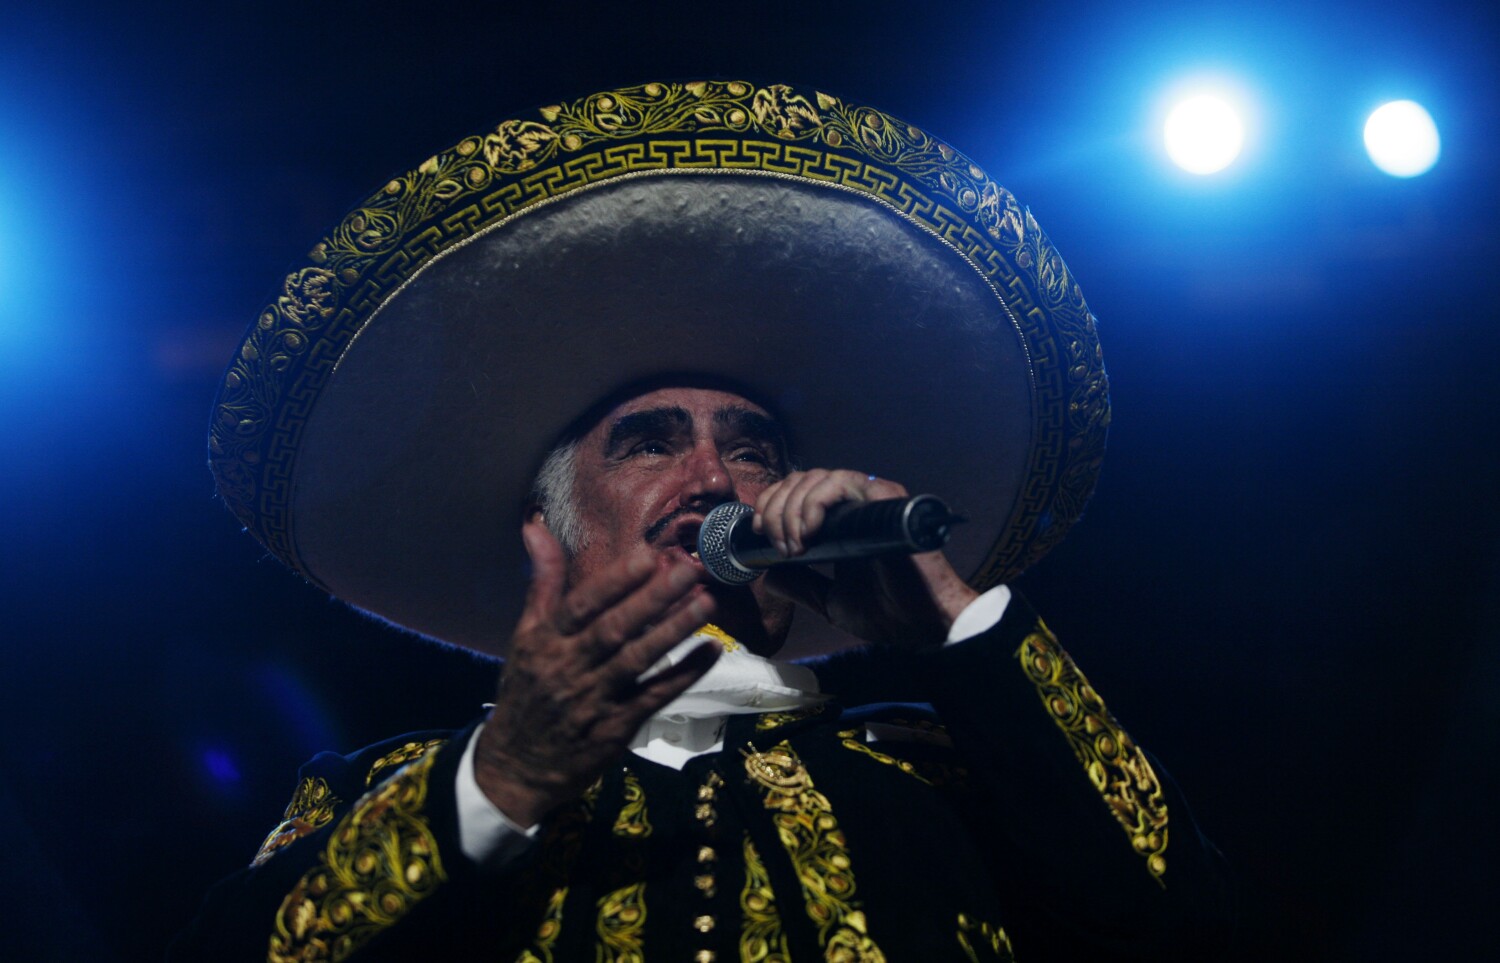 Podcast: Vicente Fernández, the King